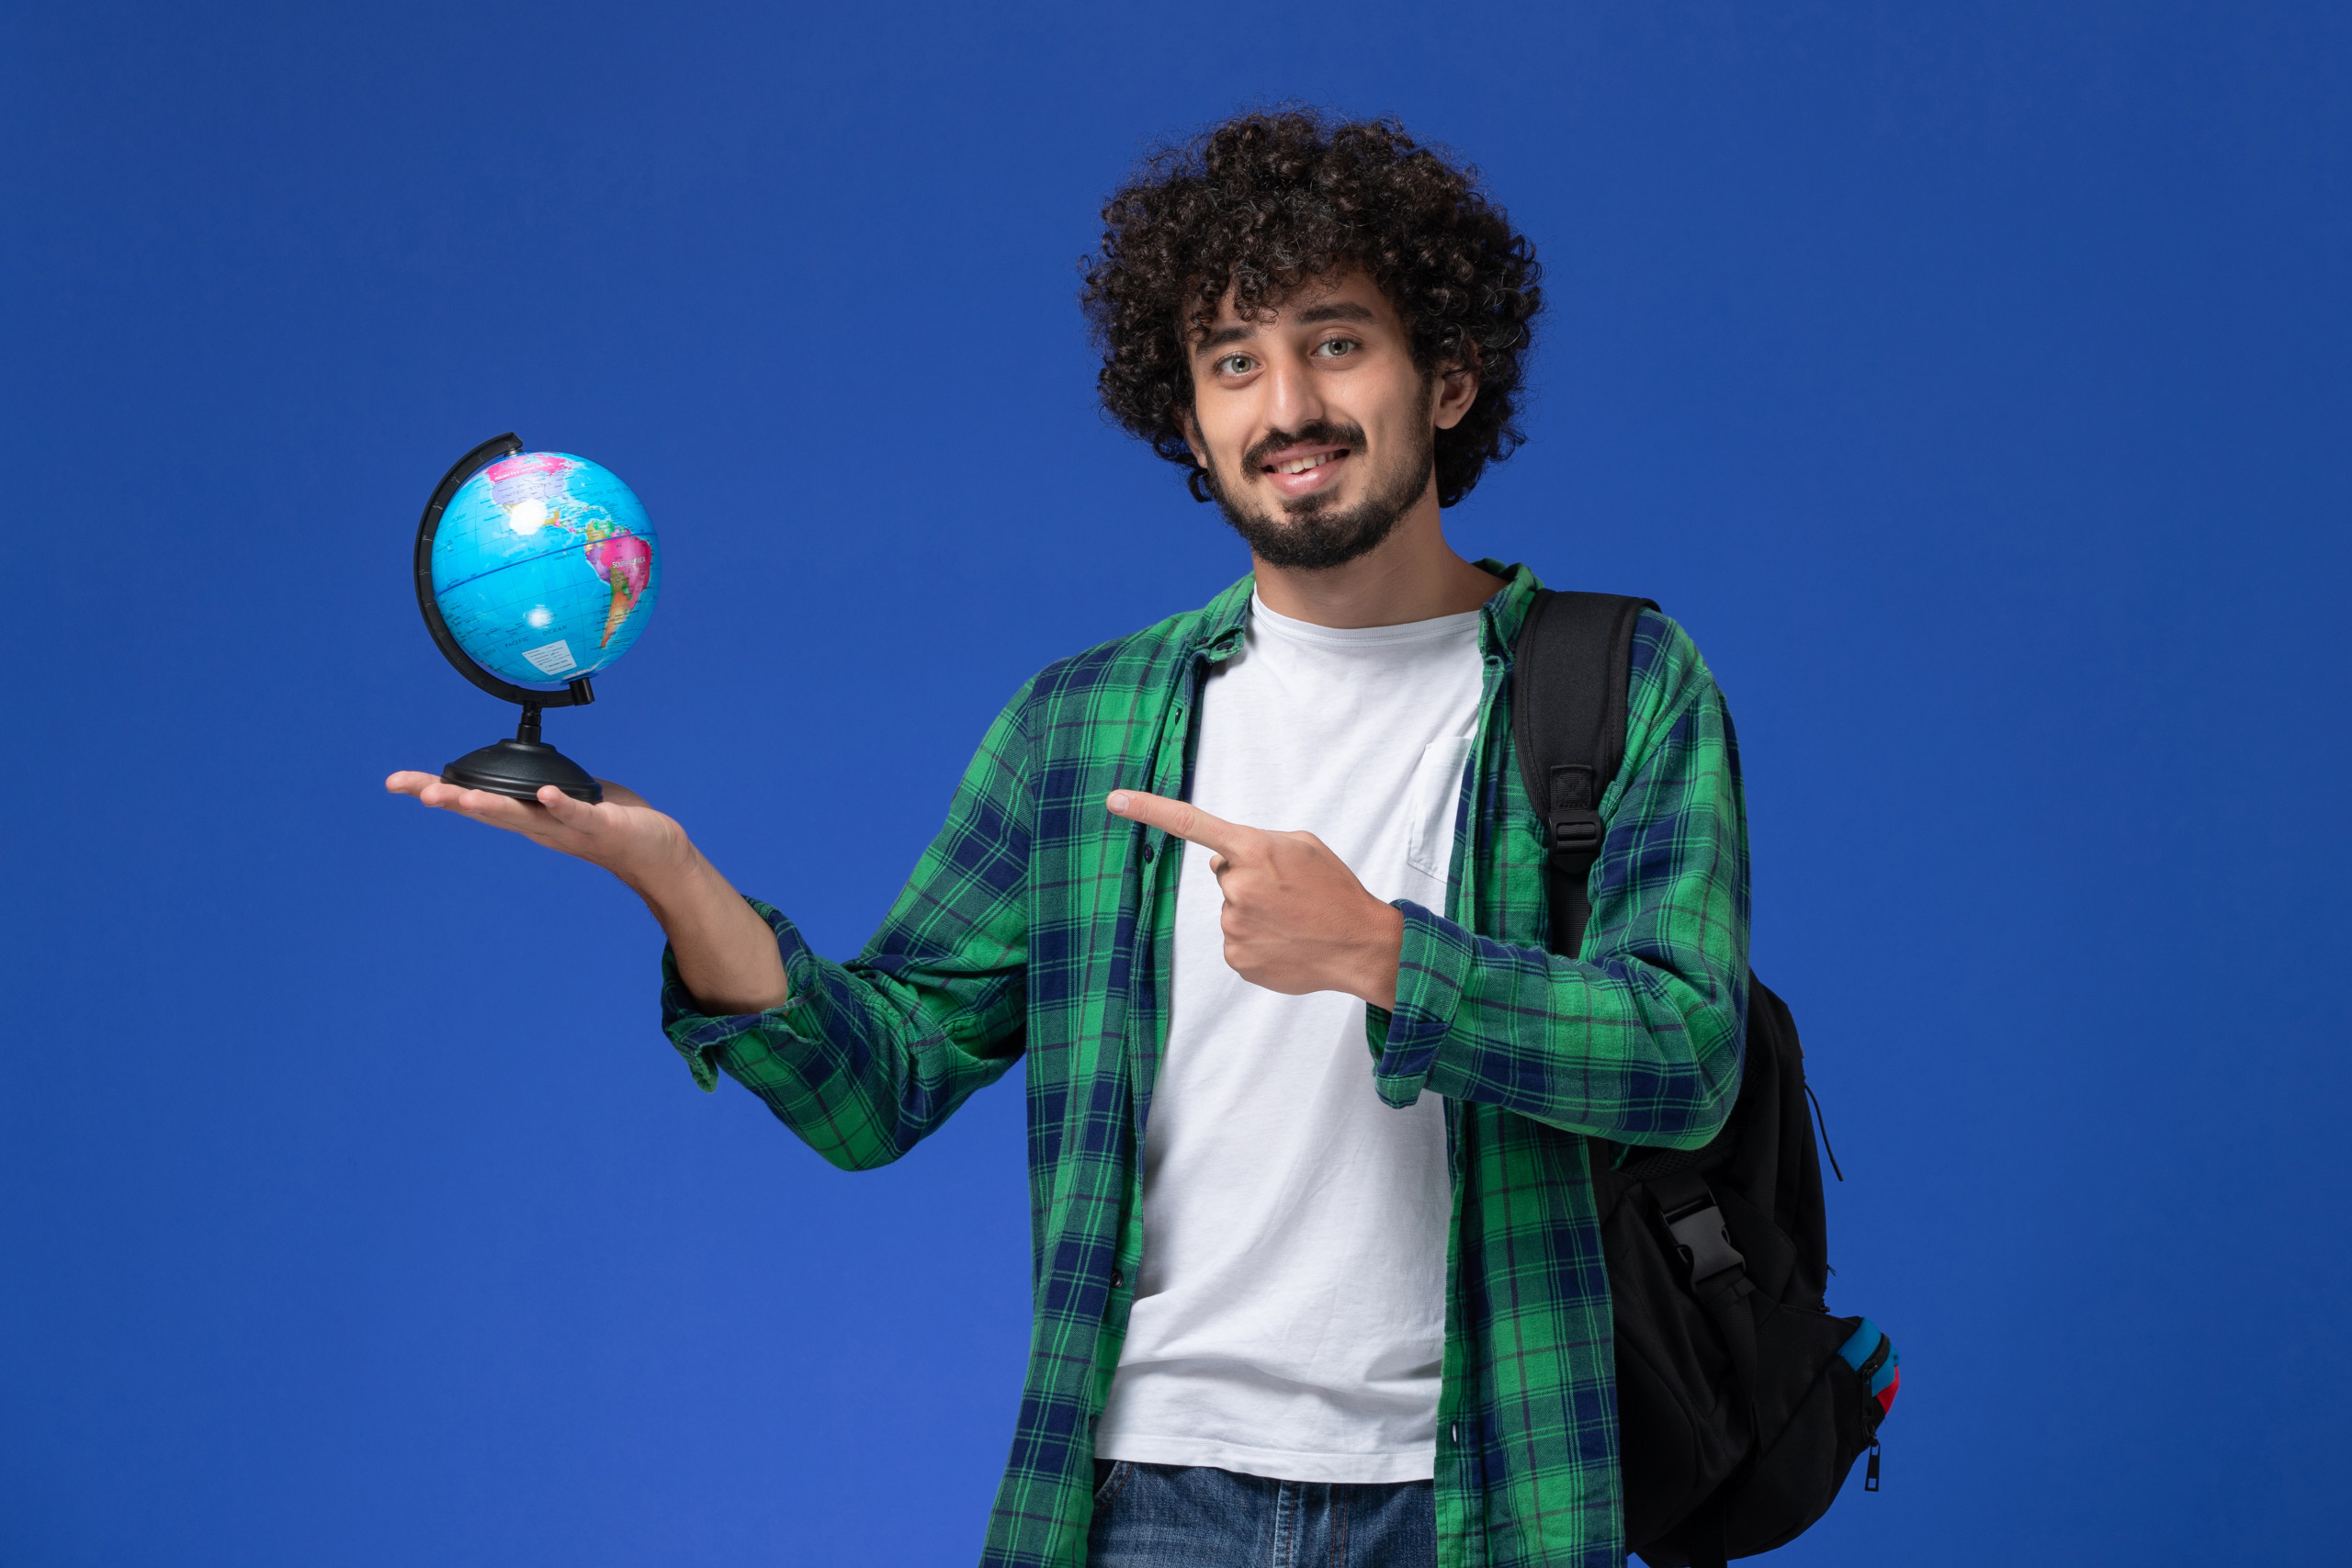 front-view-male-student-green-checkered-shirt-wearing-black-backpack-holding-little-globe-smiling-blue-wall